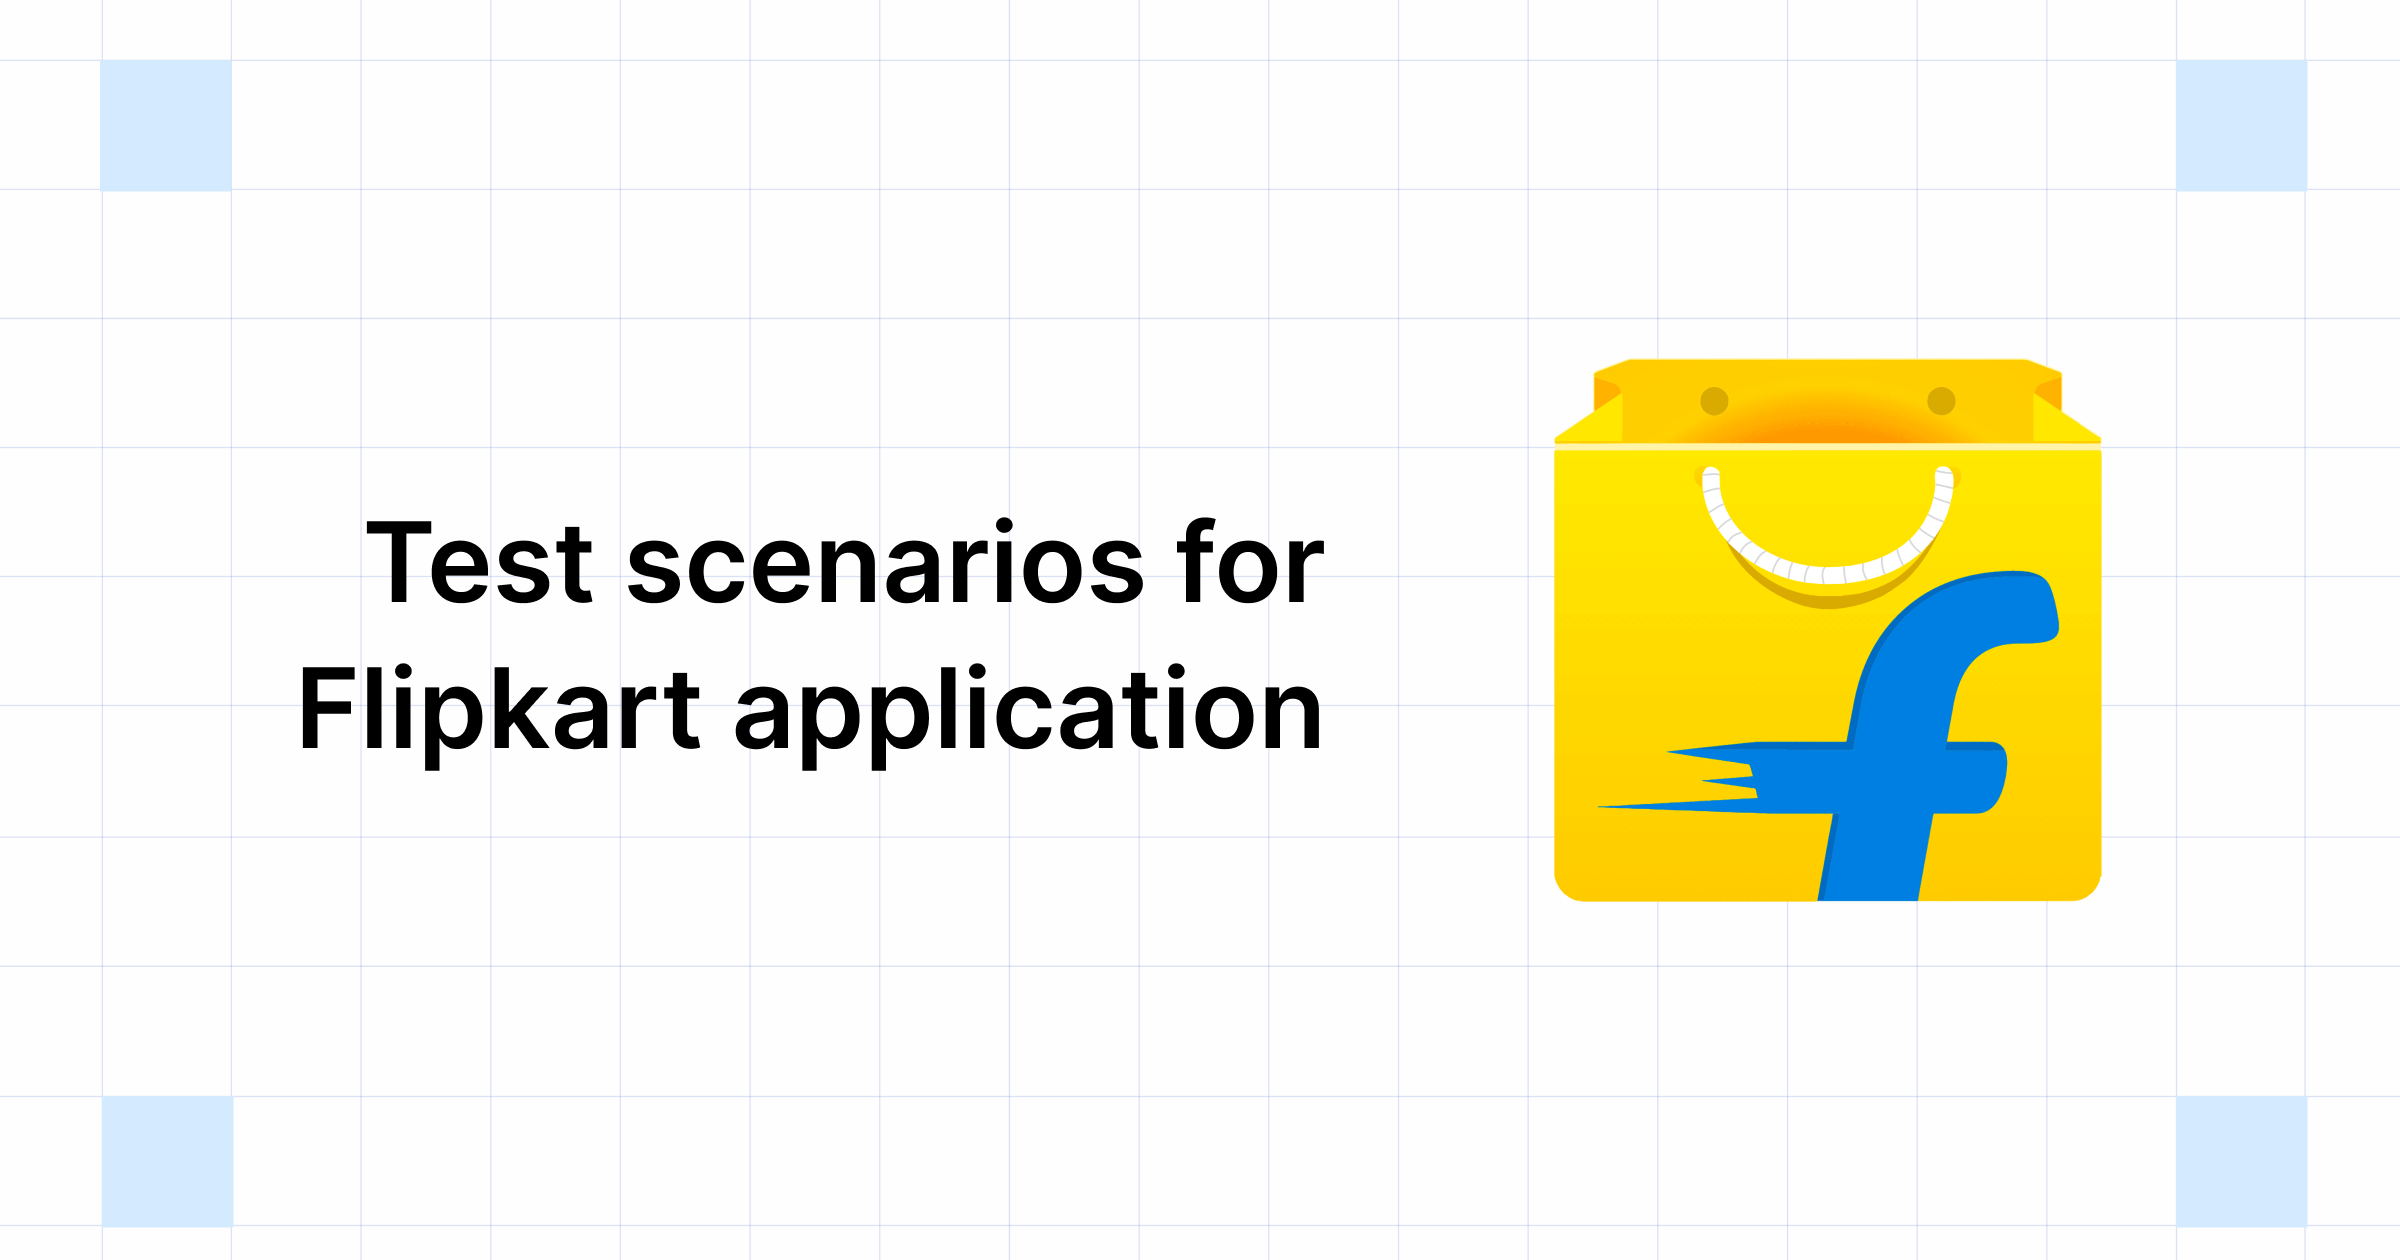 What are the Test Scenarios for Flipkart Application?